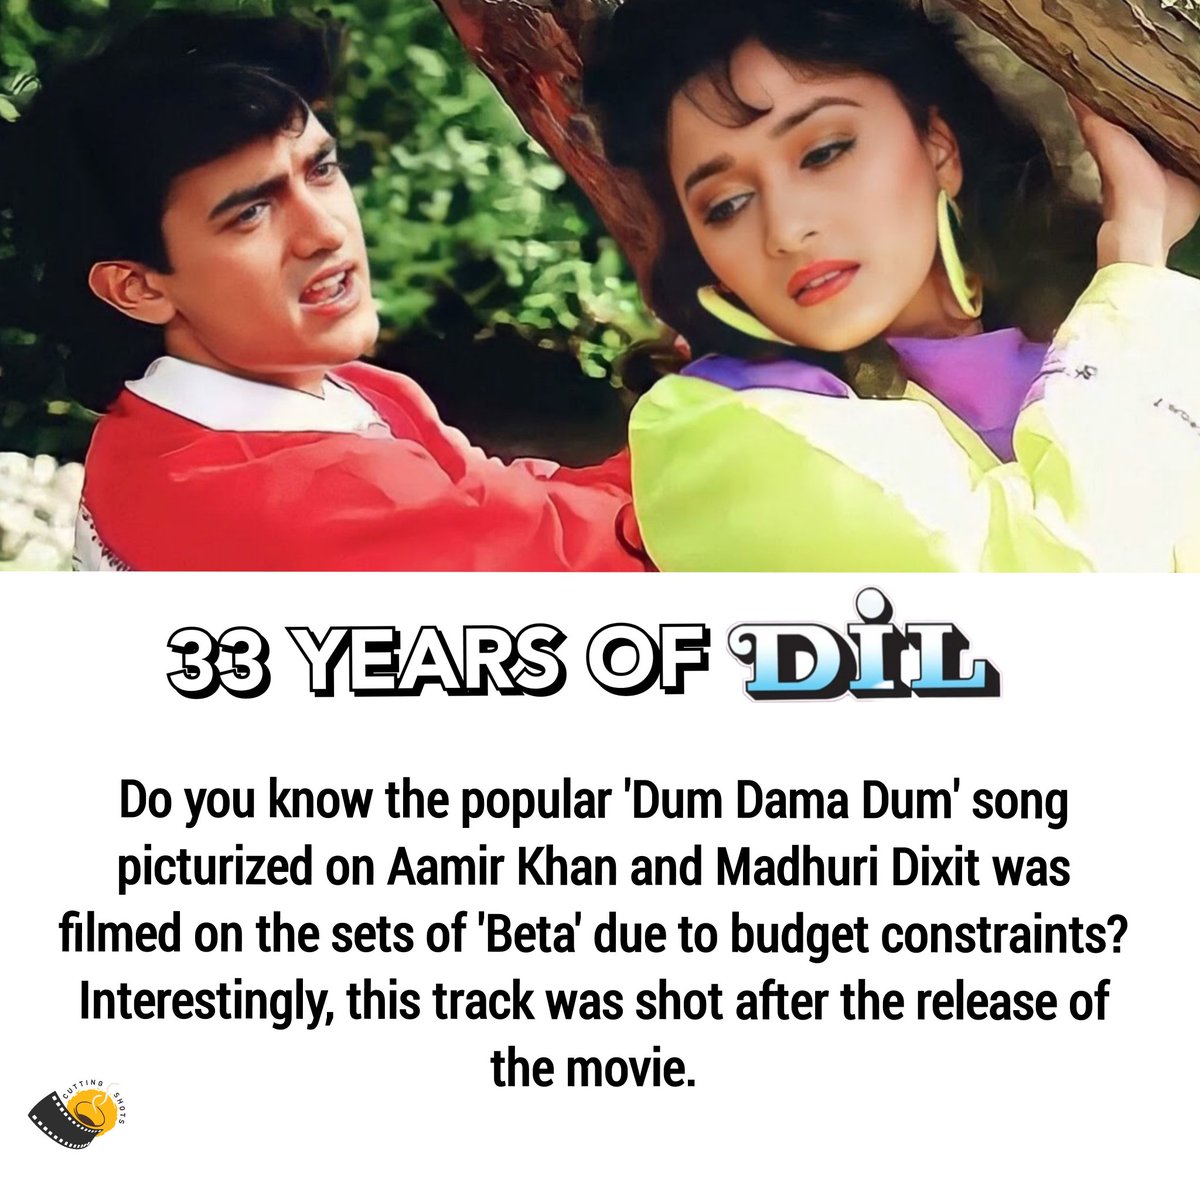 Locking horns with Sunny Deol's 'Ghayal' at the box office on June 22, 1990 was Indra Kumar's 'Dil'. We bring you a fun fact about this Aamir Khan-Madhuri Dixit starrer as the film completes 33 years today.

#33YearsOfDil #dil #aamirkhan #madhuridixit #bollywood #cuttingshots